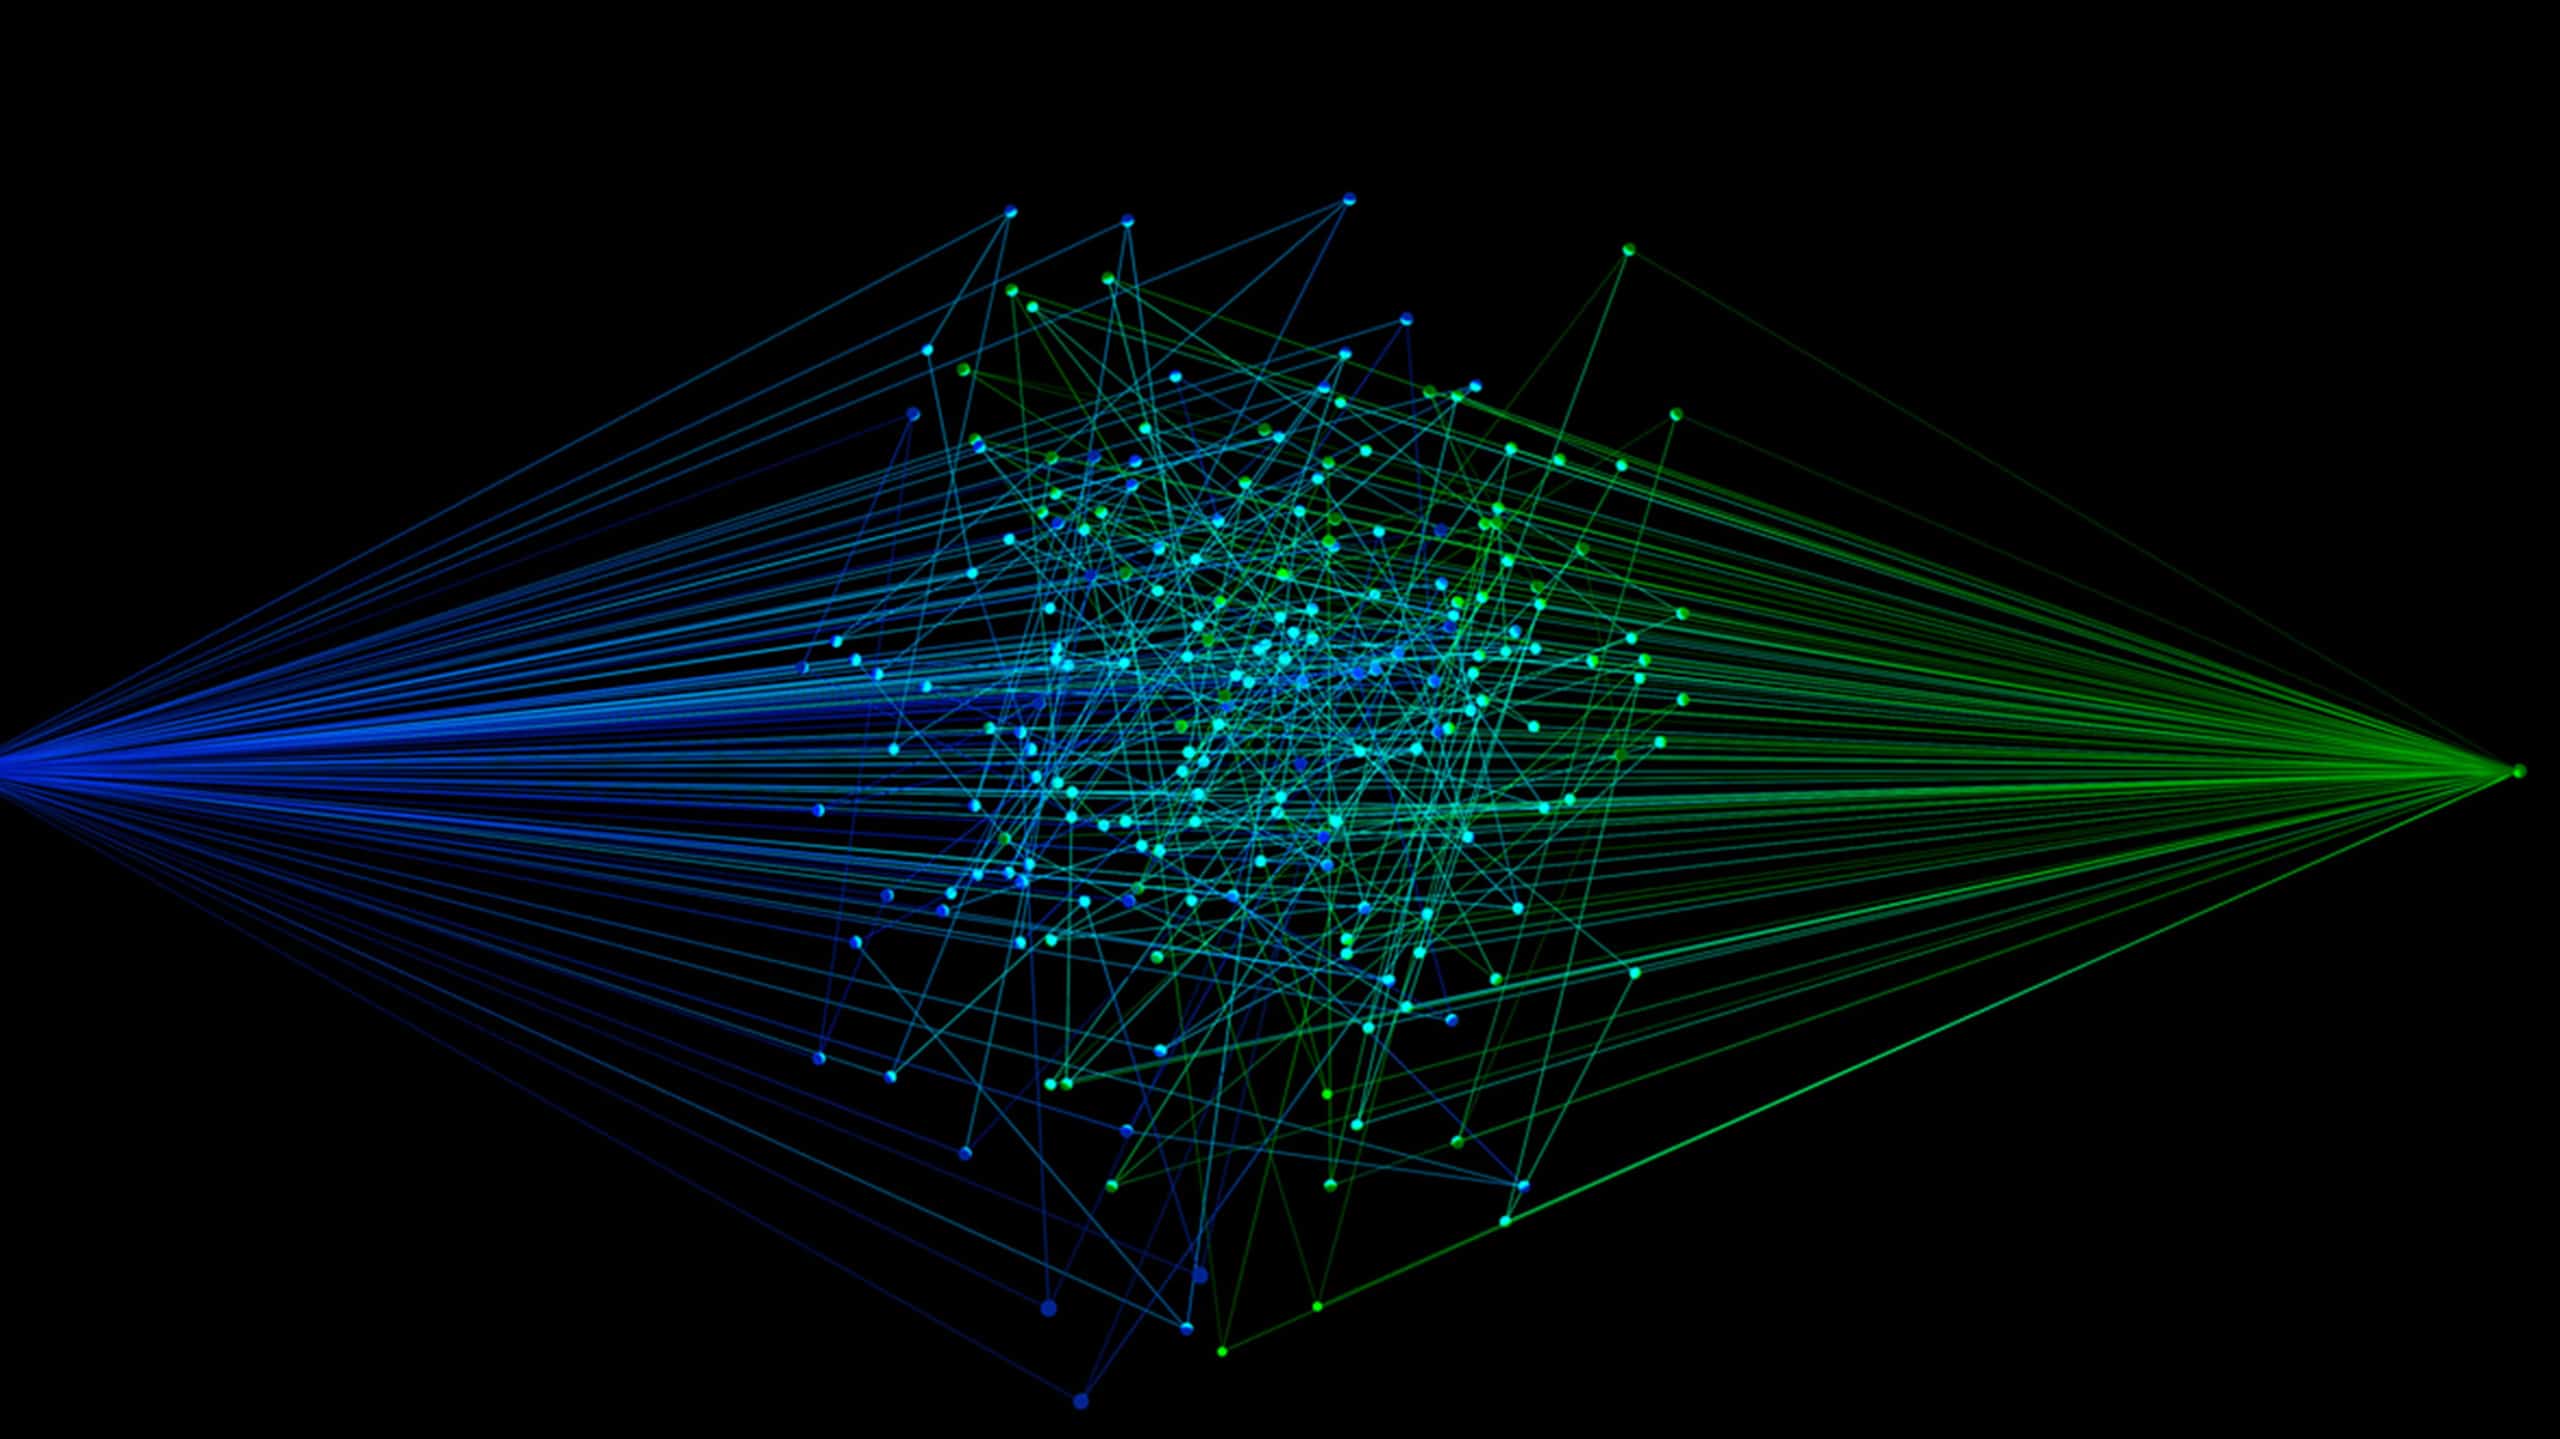 A digital illustration of a complex network structure with nodes and interconnected lines, shining in variably bright blue and green colors on a black background, representing the concepts discussed in "Malicious Intent and